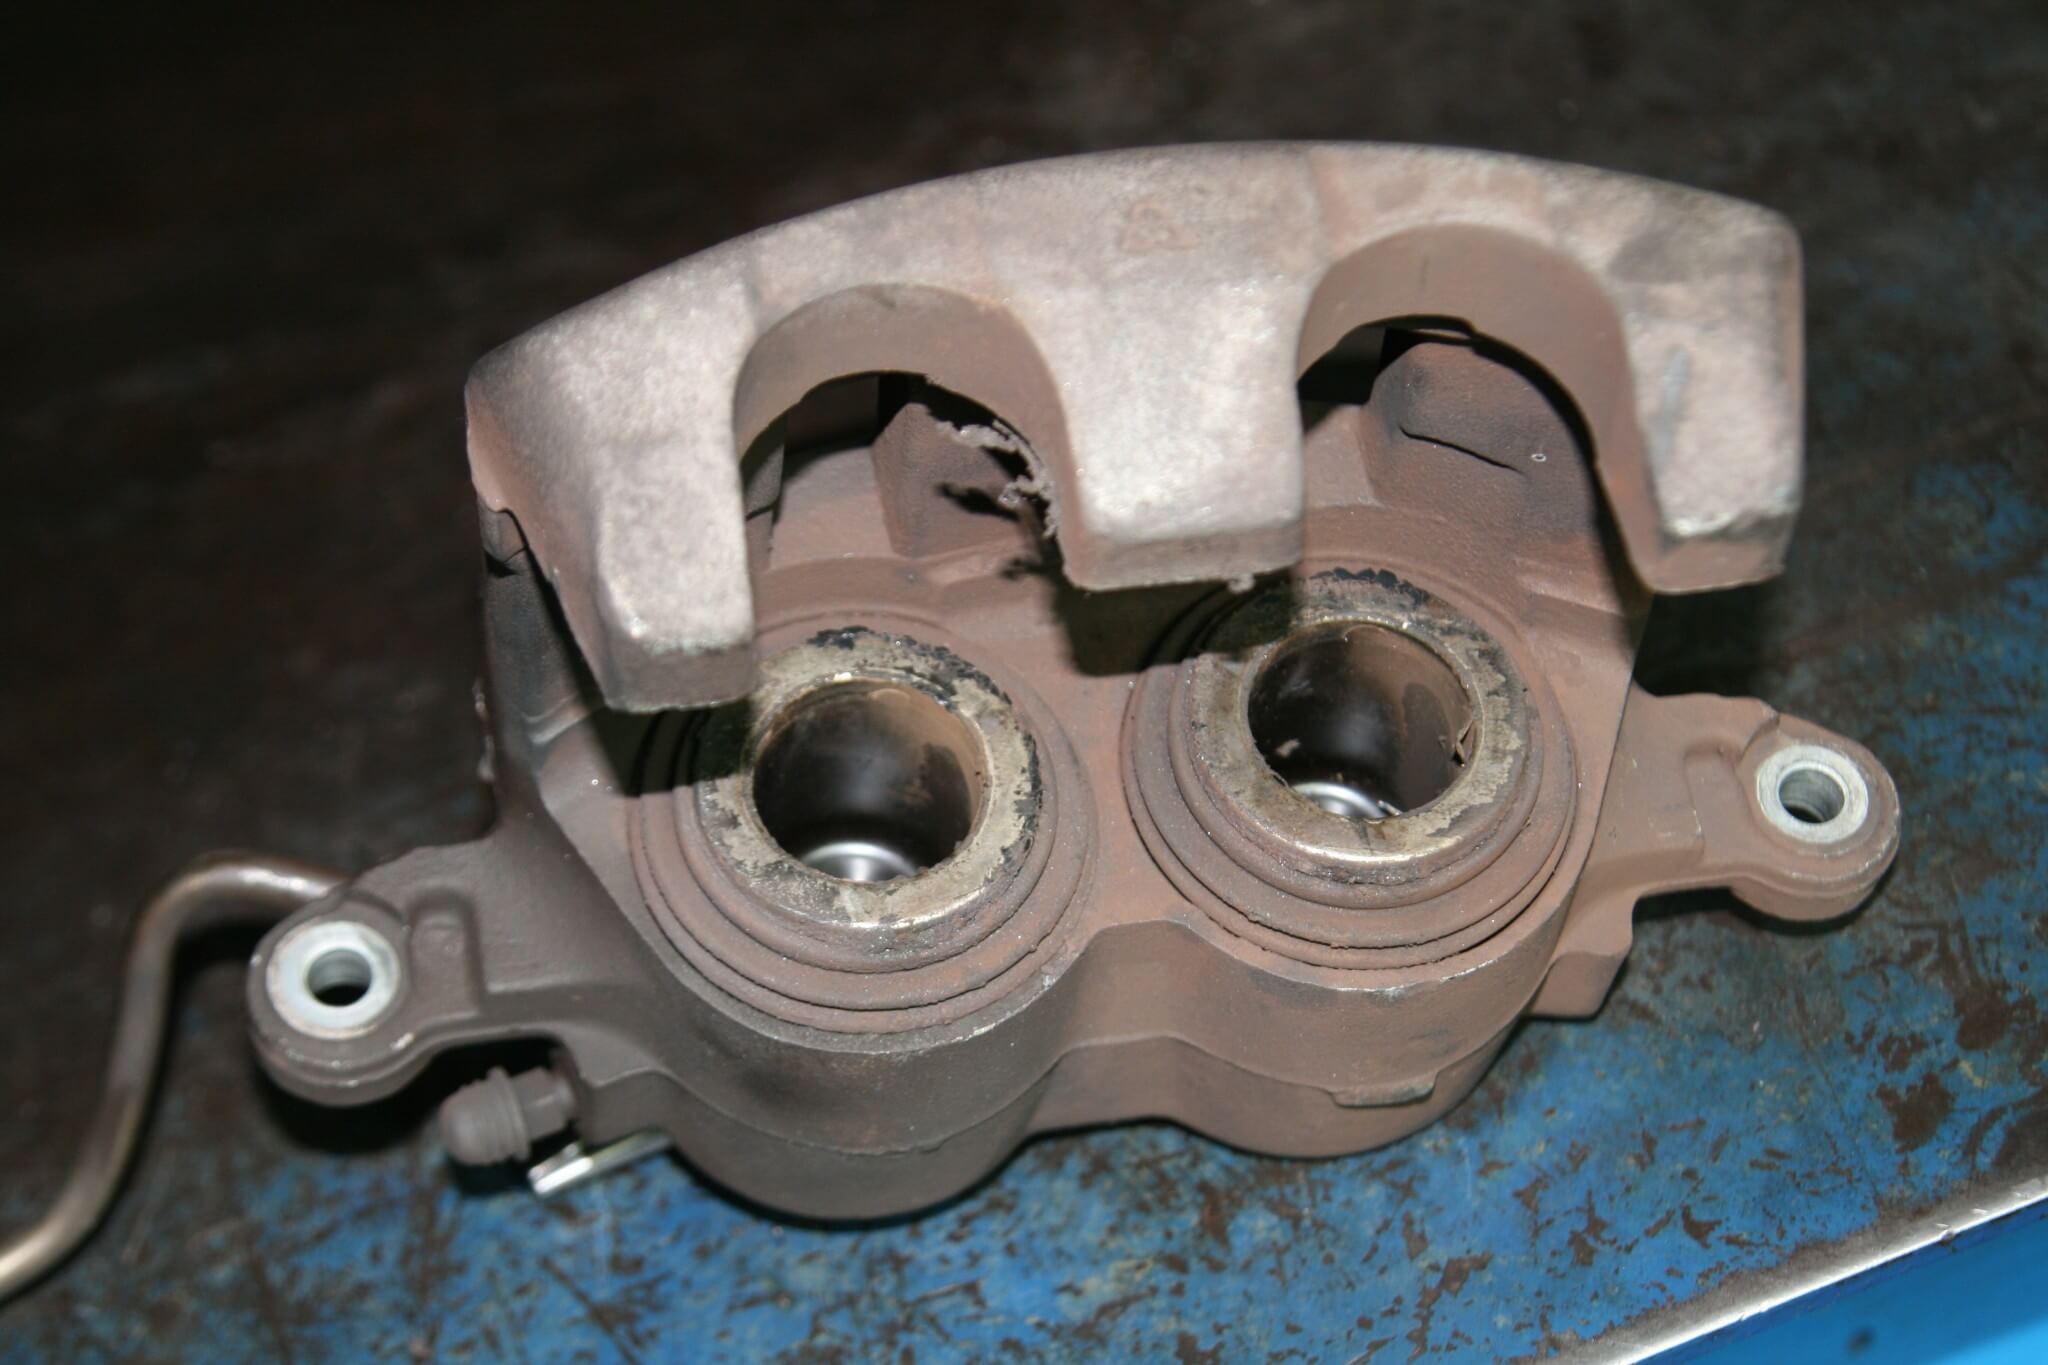 2. The OEM brake calipers are a two-piston floating design. This is a good setup for stock trucks, but braking can be vastly improved with the right aftermarket parts. 